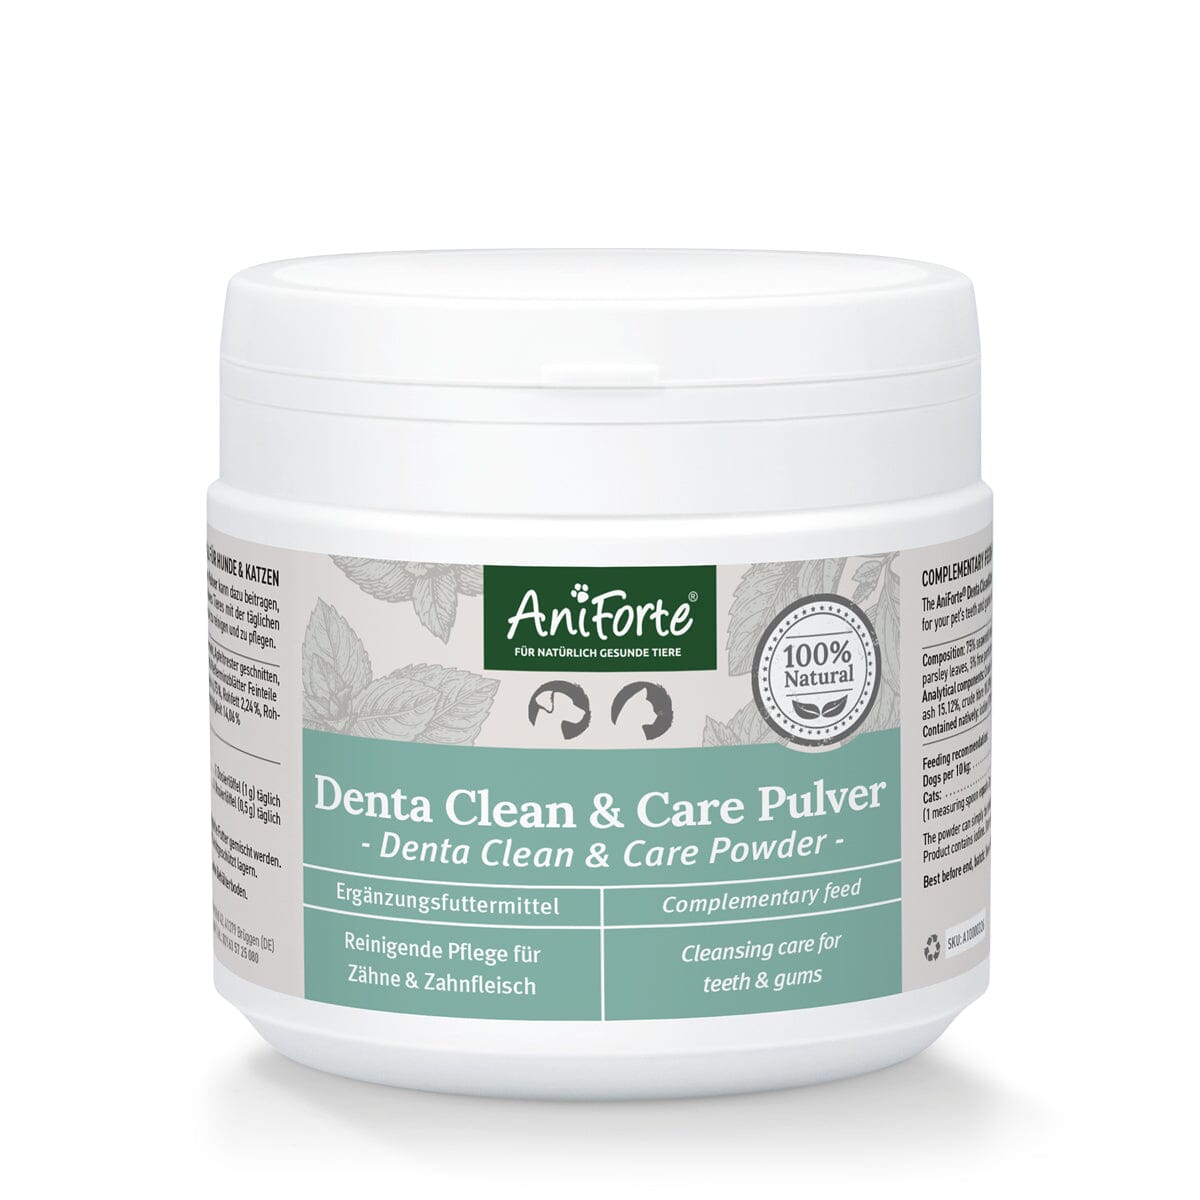 Denta Clean & Care Powder for Dogs and Cats - Cleans Teeth and Gums Naturally - AniForte UK